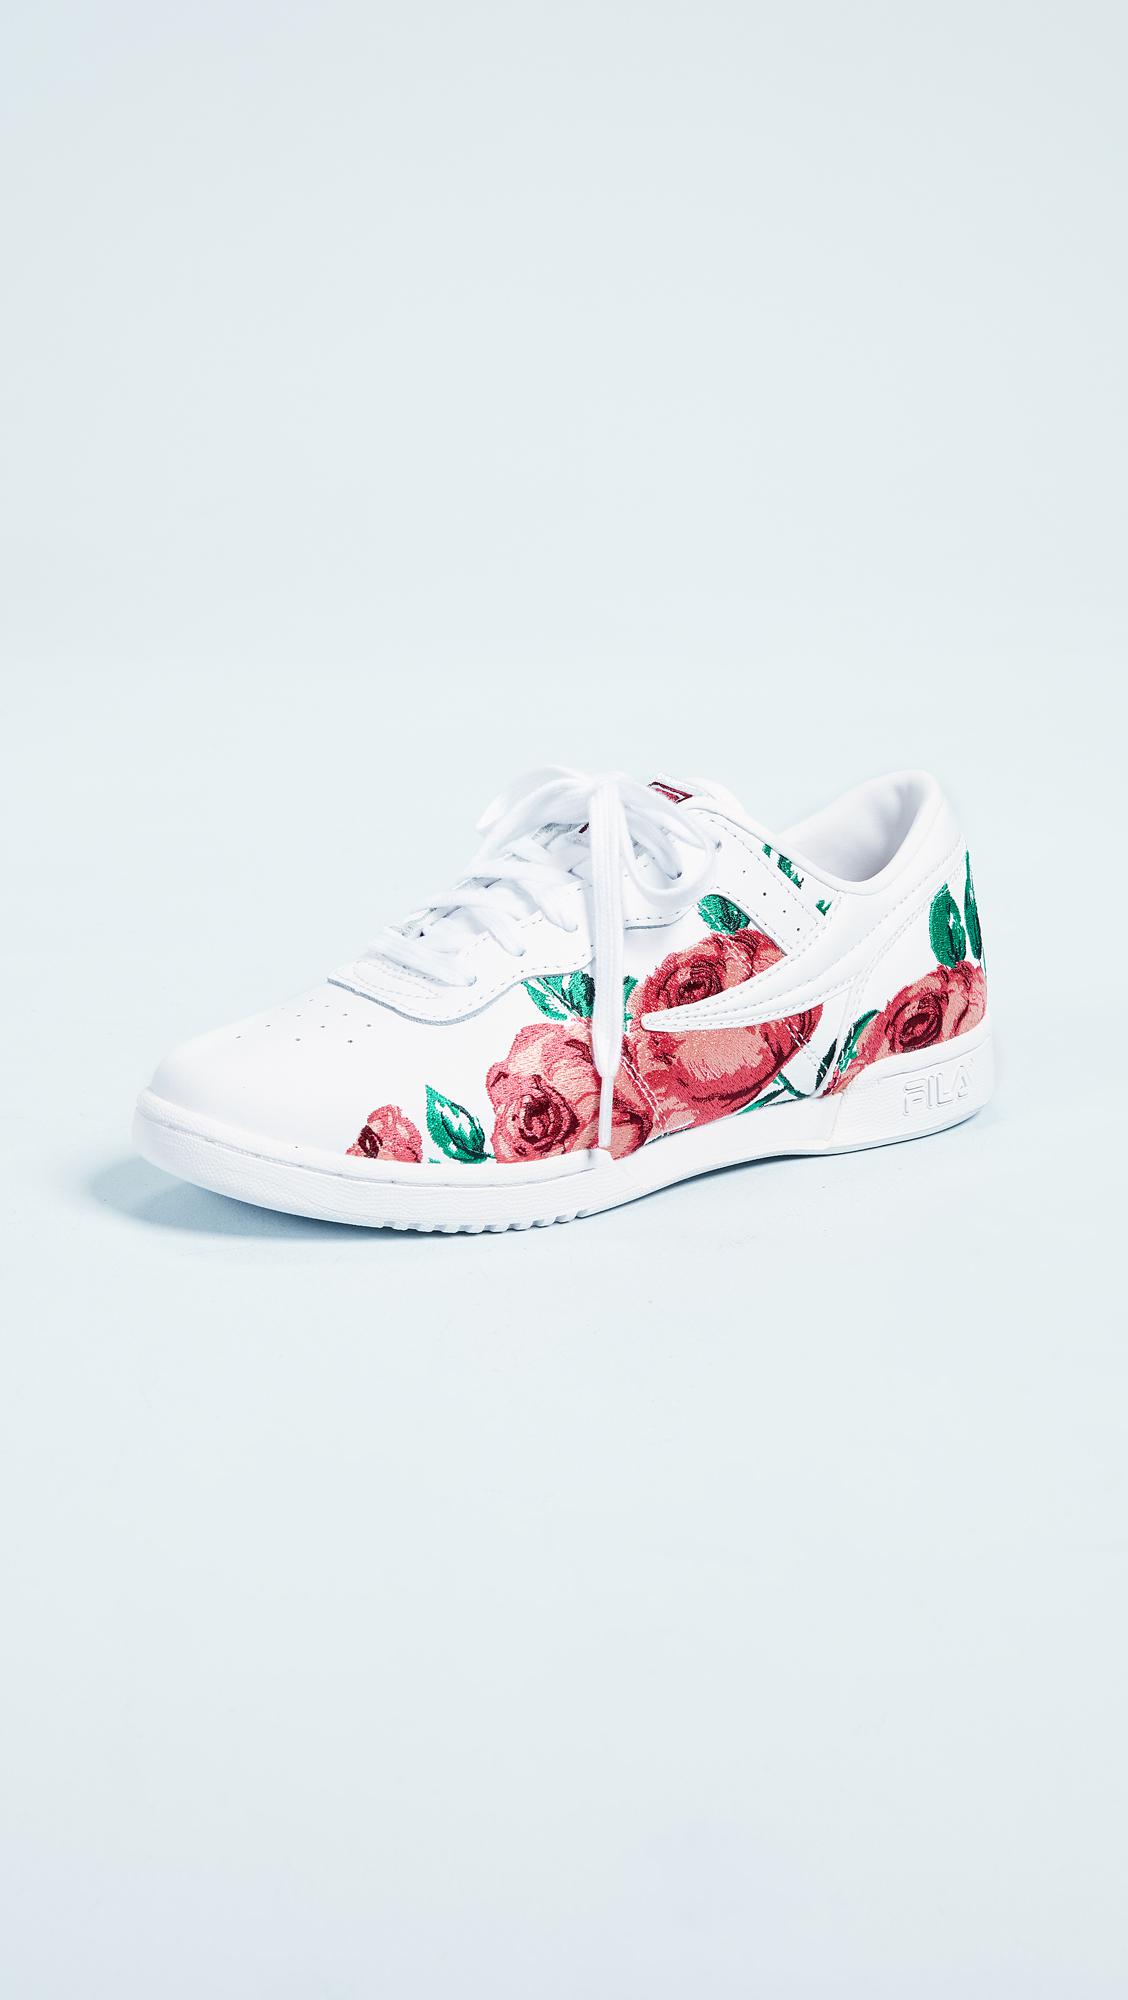 Fila Original Embroidery Sneakers in White | Lyst